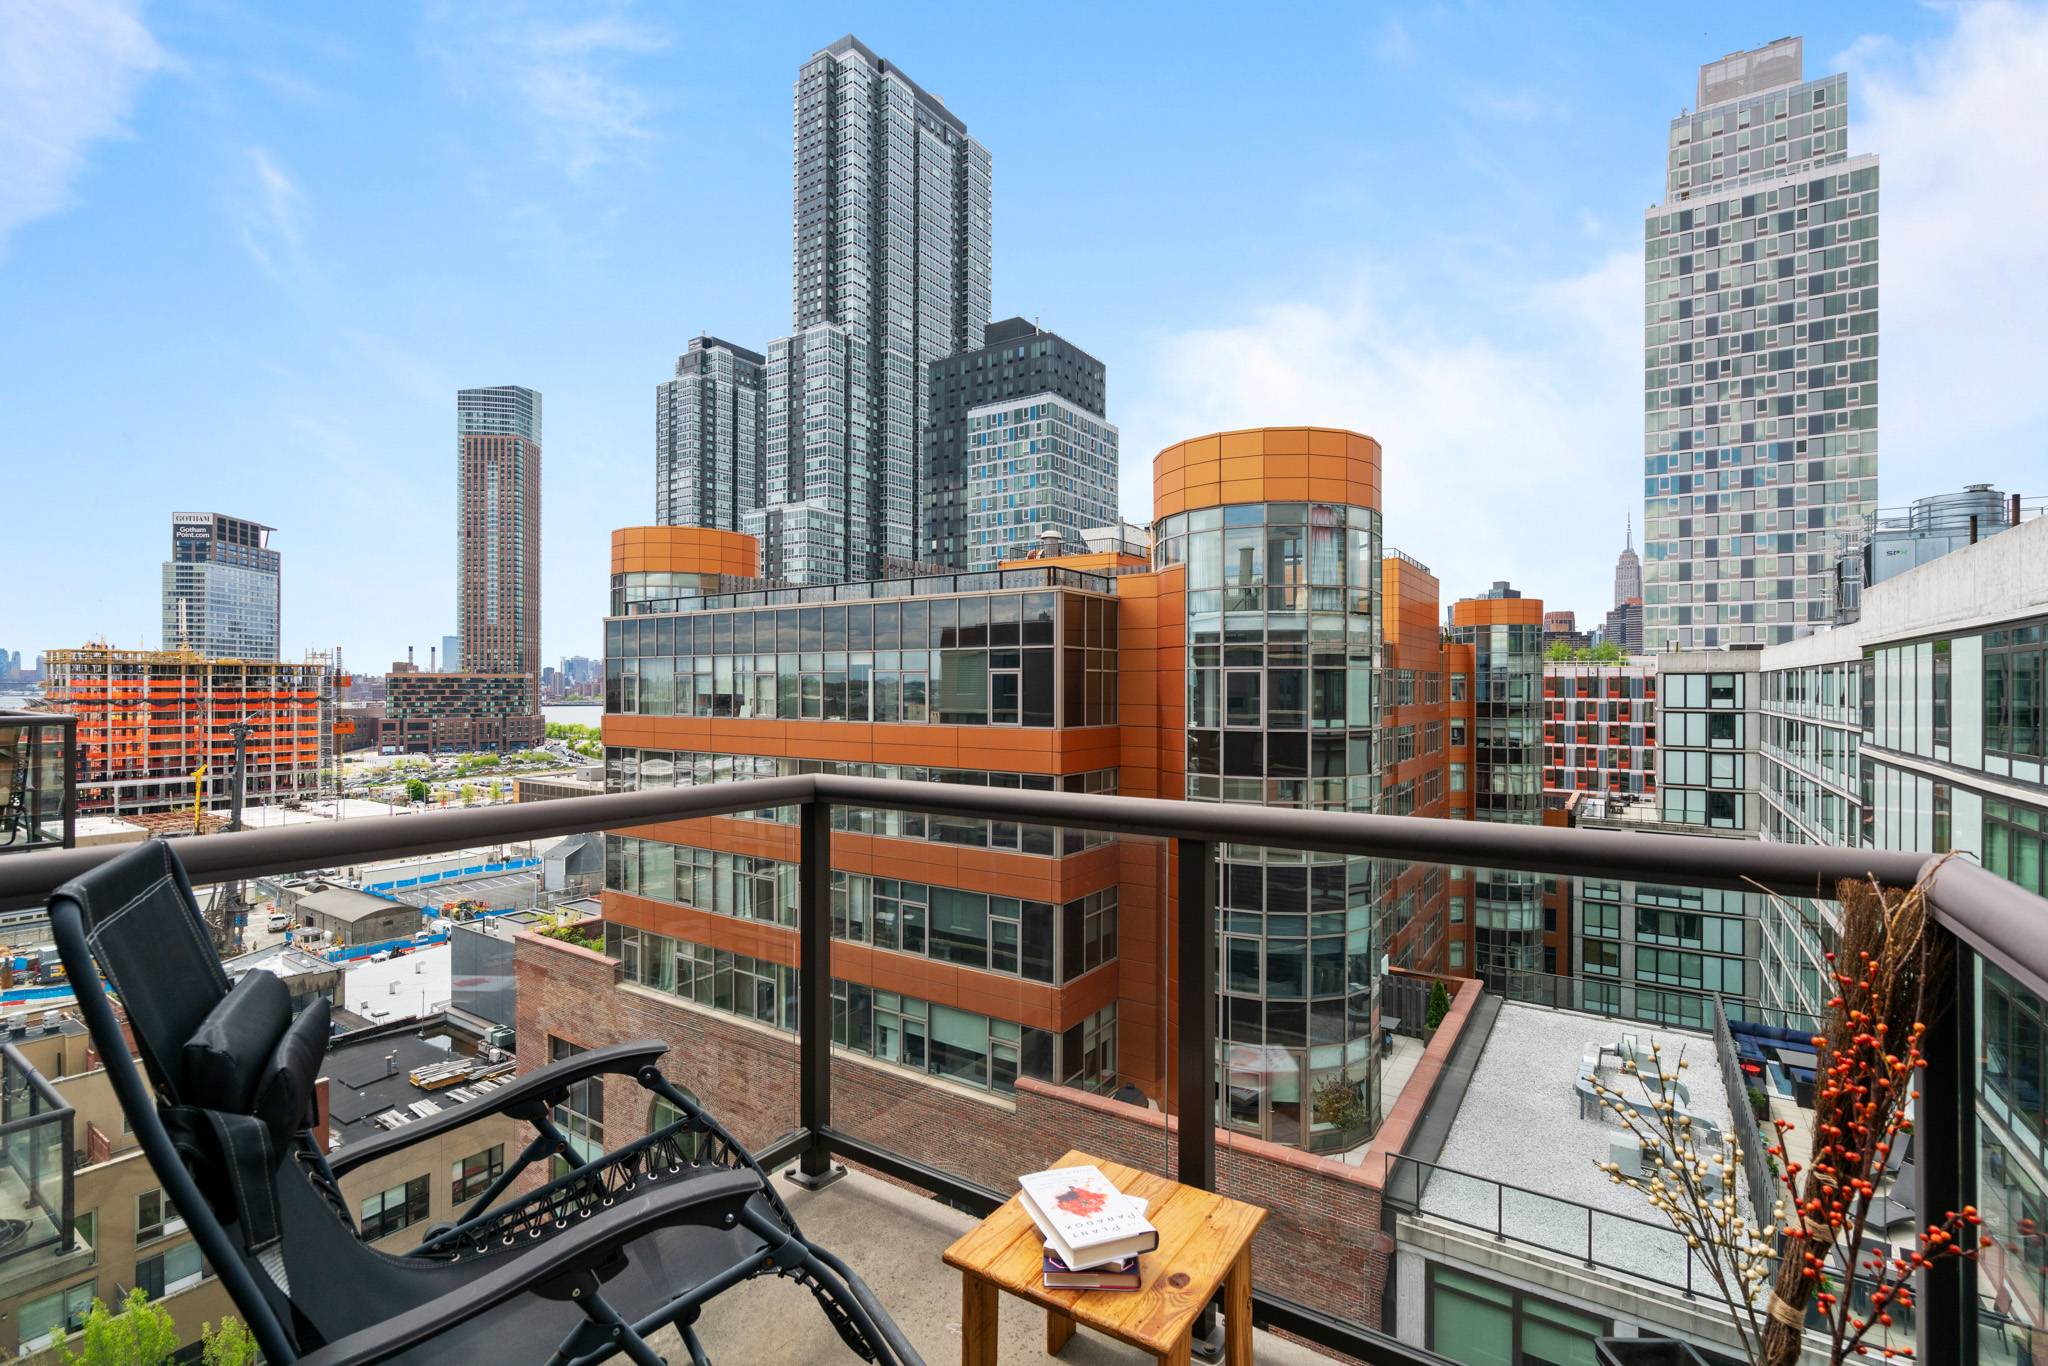 Penthouse | Direct Manhattan View | Private Balcony | Soaring Ceilings | Washer Dryer In-Unit | South West | Live Above It All in this Stunning Top Floor Apartment